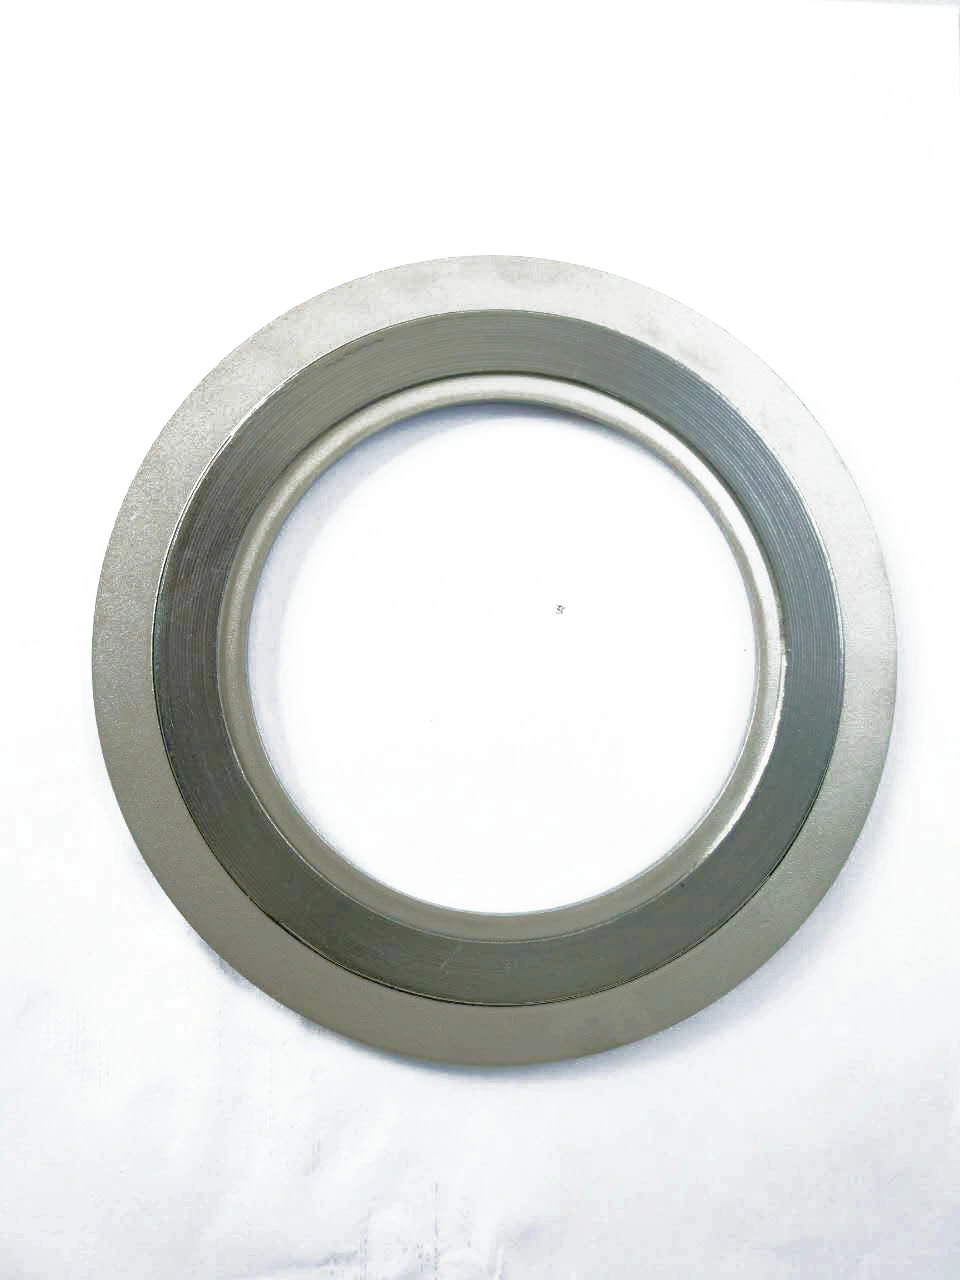 Spiral Wound Gasket Formed by Overlapping and Stainless Steel Tape with Flexible Graphite Tape